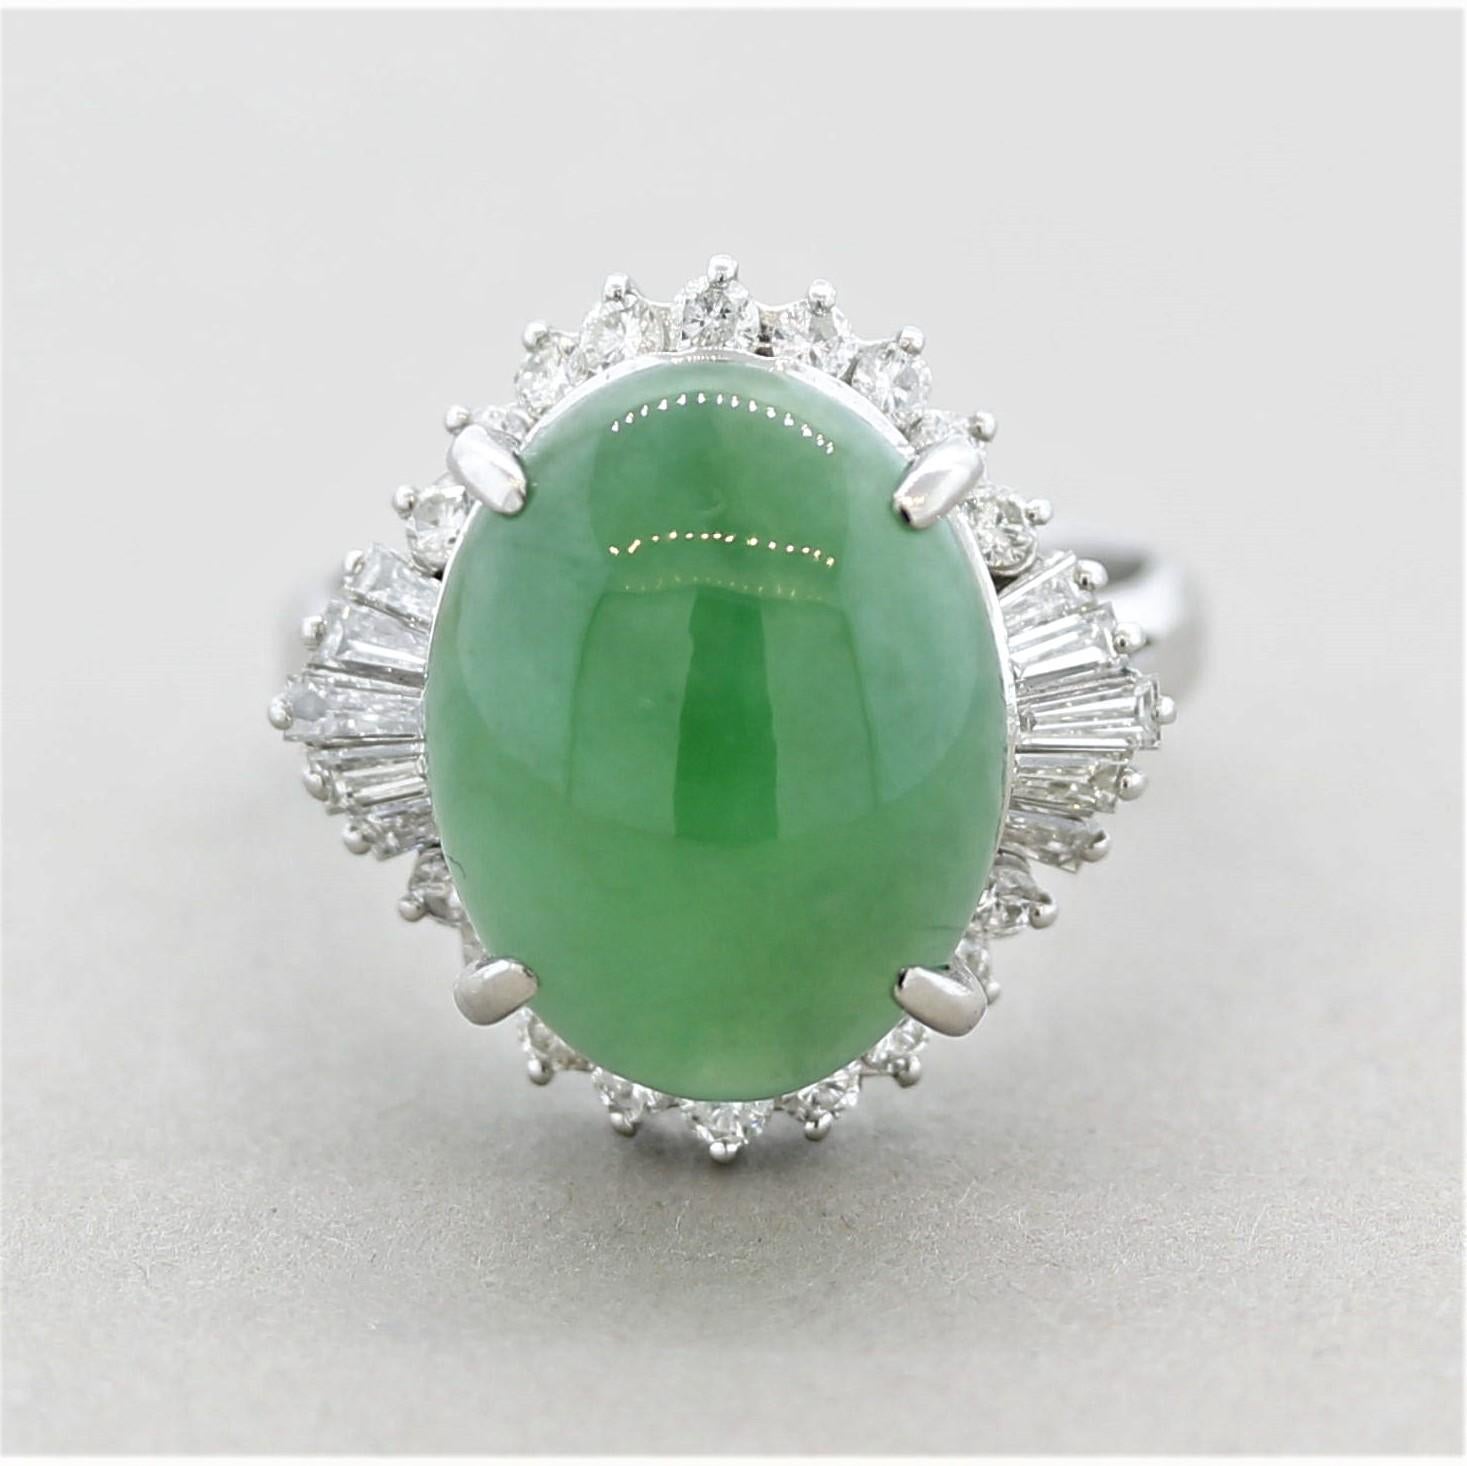 A fine and stylish jade ring! The jade weighs 7.34 carats and has a soft sweet green color with excellent luster and light appears to roll across the stone like silk. It is accented by 0.71 carats of round brilliant-cut and baguette-cut diamonds set